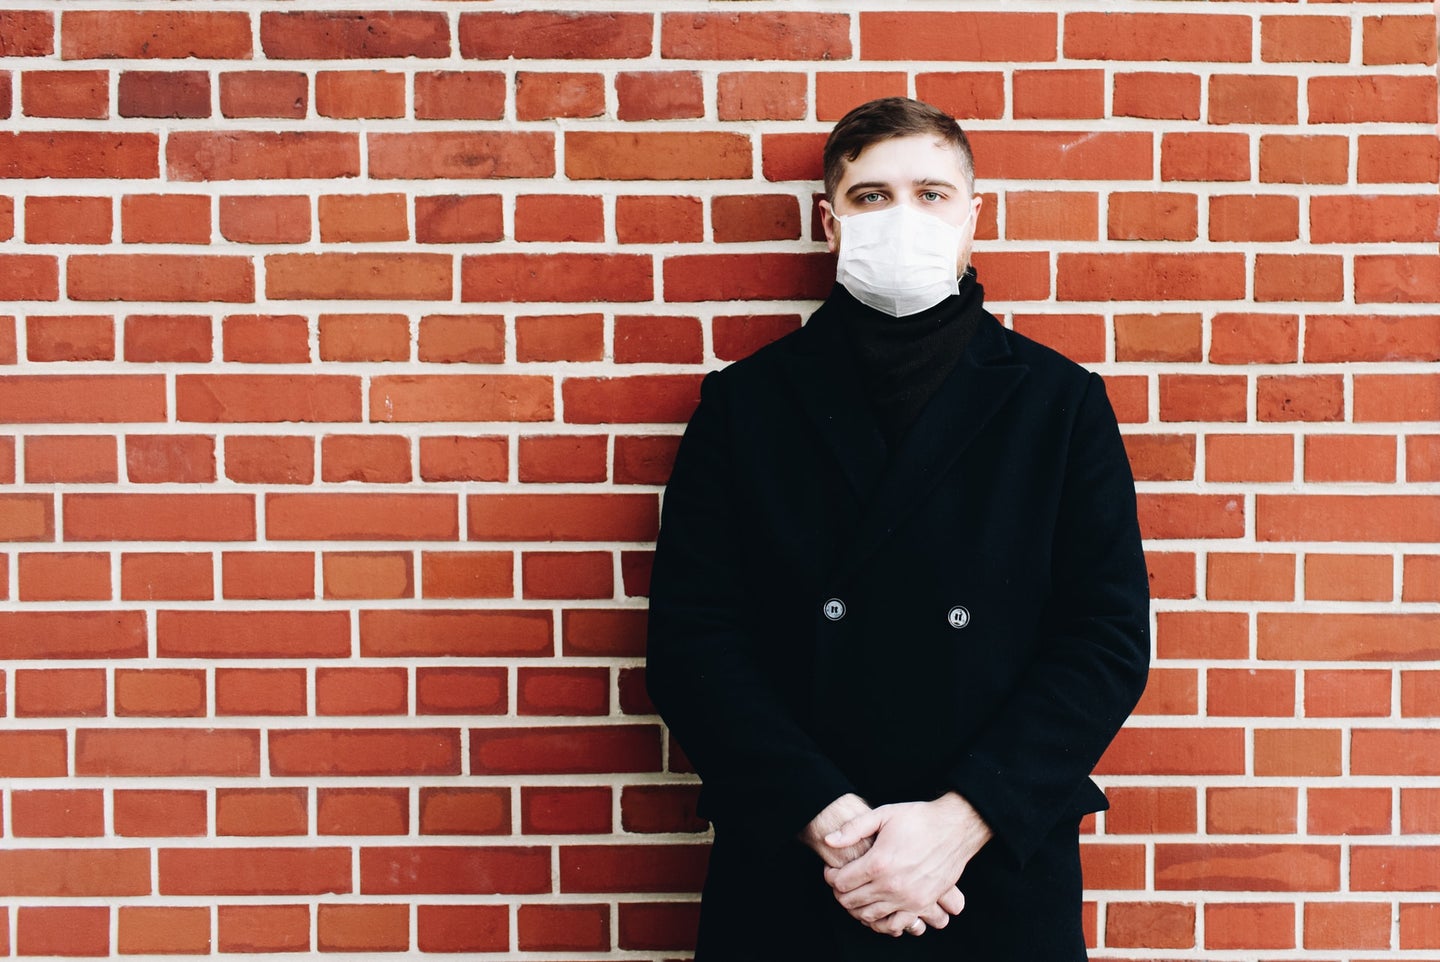 man in mask stands in front of brick wall